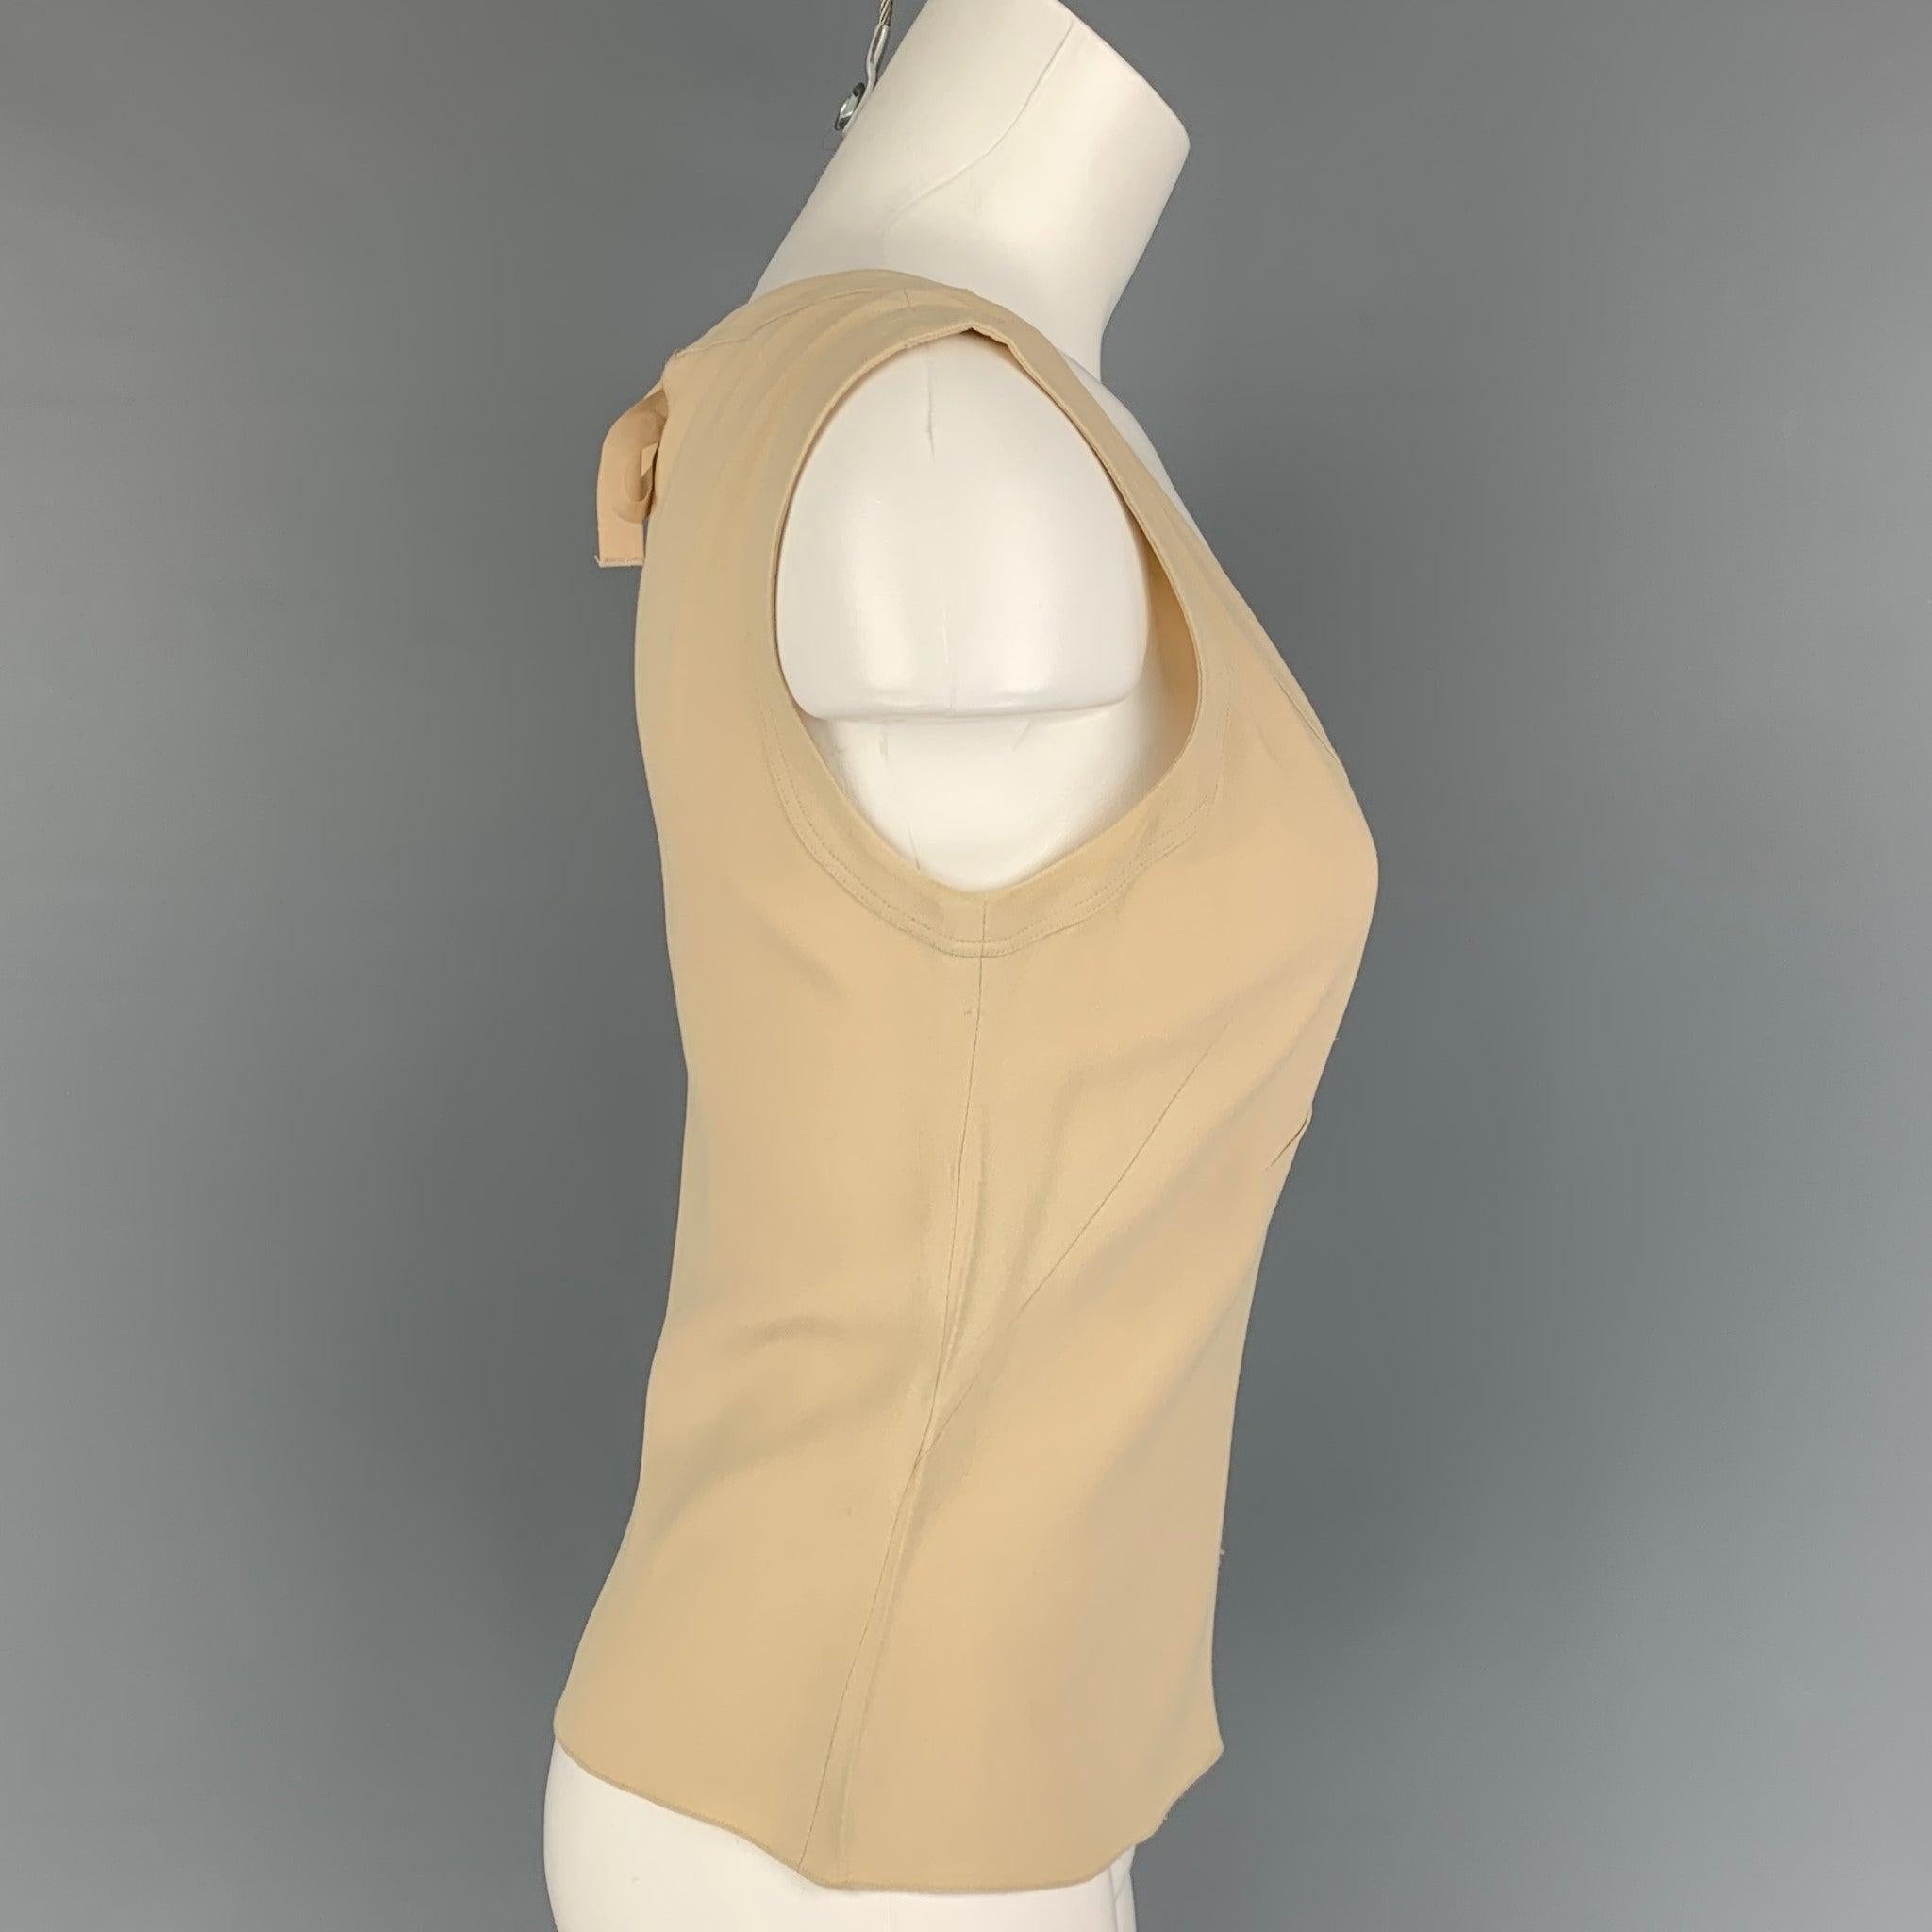 PRADA dress top comes in a beige acetate / viscose featuring a sleeveless style, pleated details, and a back self-tie closure. Made in Italy.
 Very Good
 Pre-Owned Condition. Light discoloration at under arm.  
 

 Marked:  40 
 

 Measurements: 
 